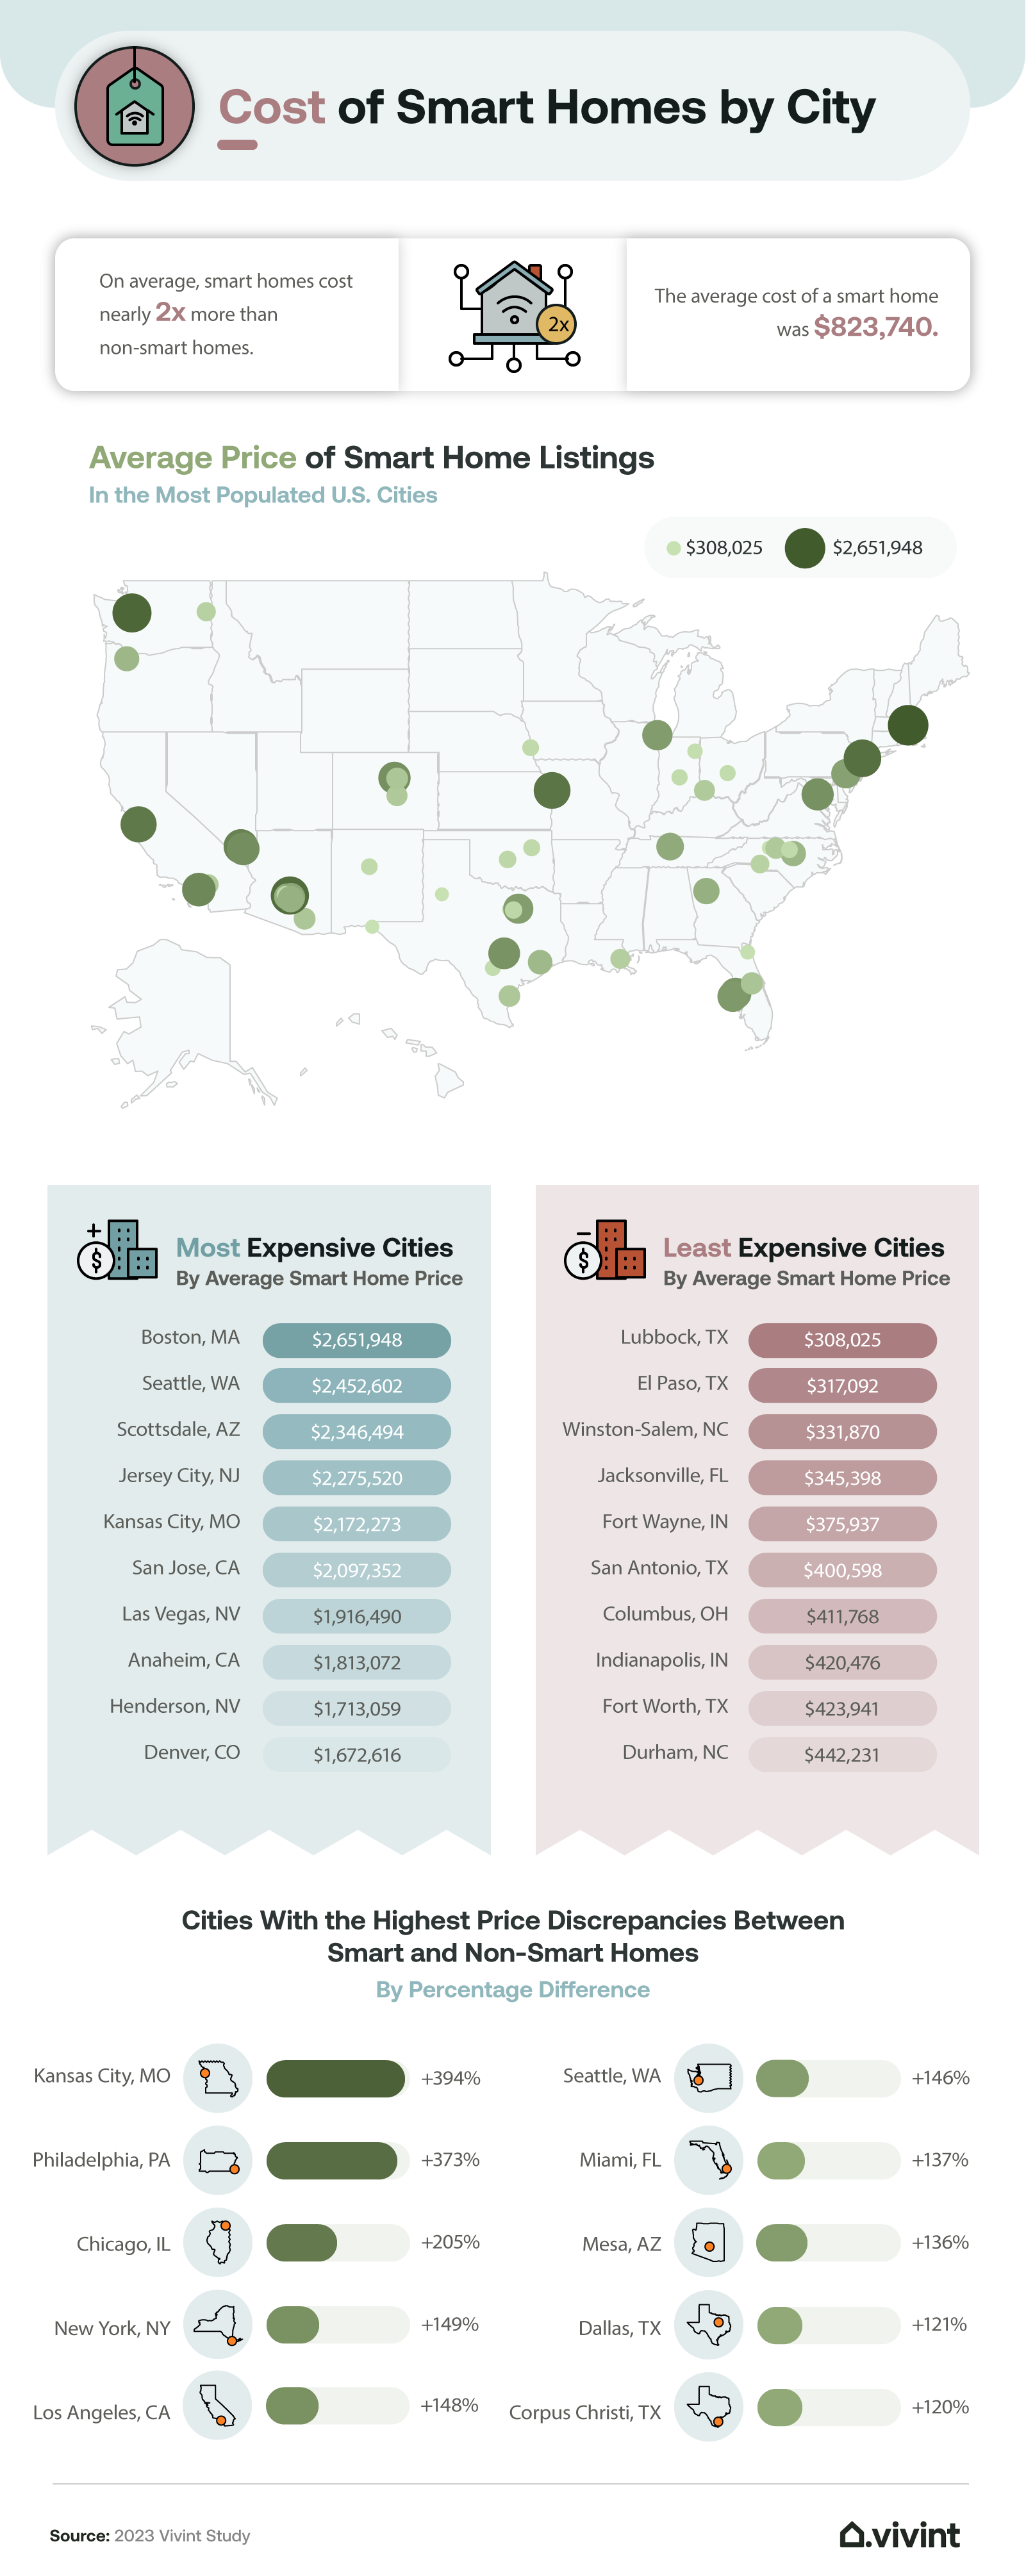 Information about the cost of smart homes by different cities.